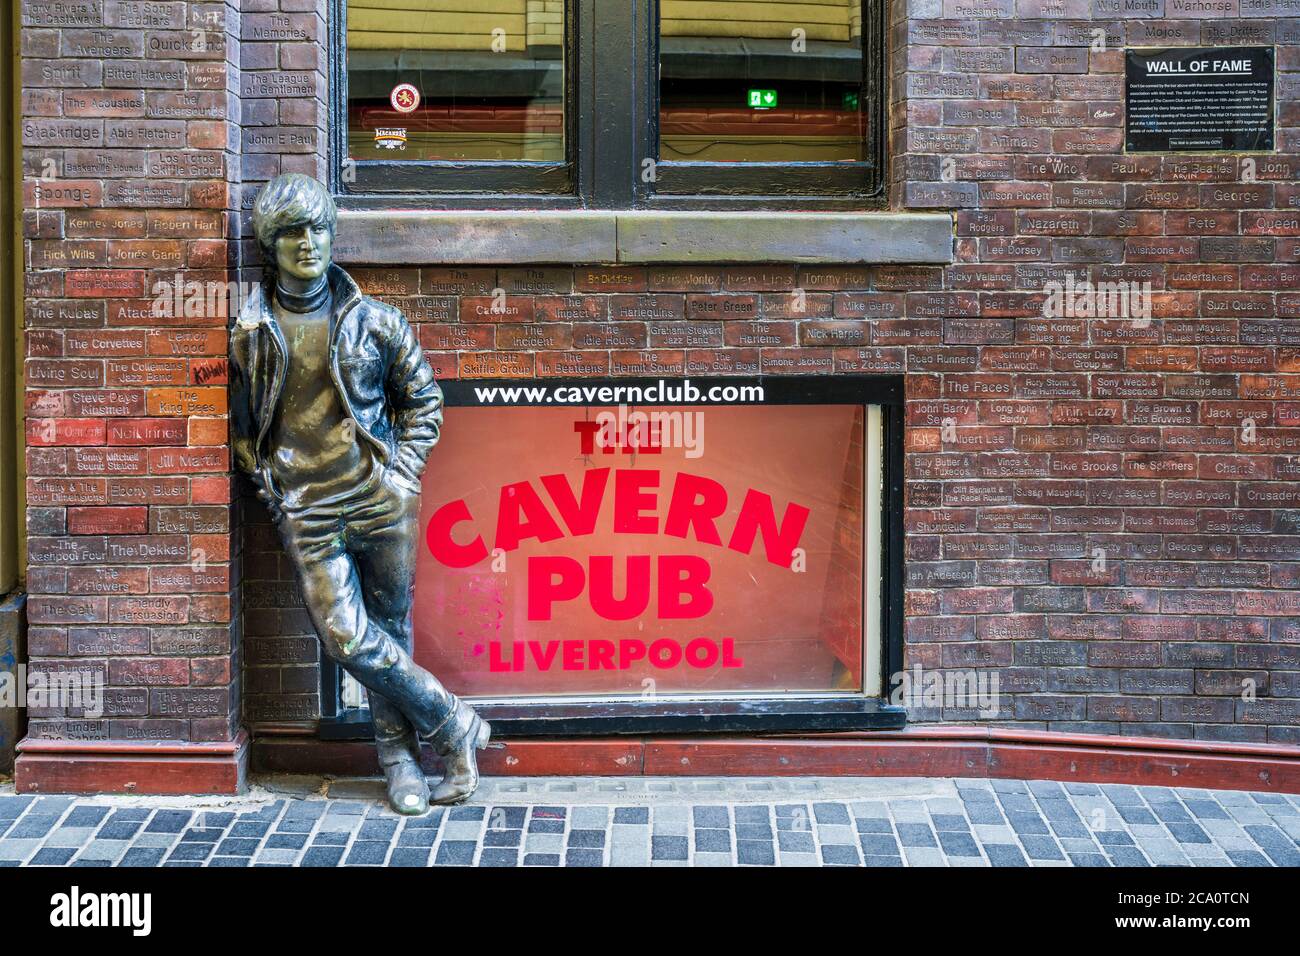 John Lennon Statue Mathew Street Liverpool near the Cavern Club. Wall of Fame showing the names of artists who played at the Cavern Club. Cavern Pub. Stock Photo